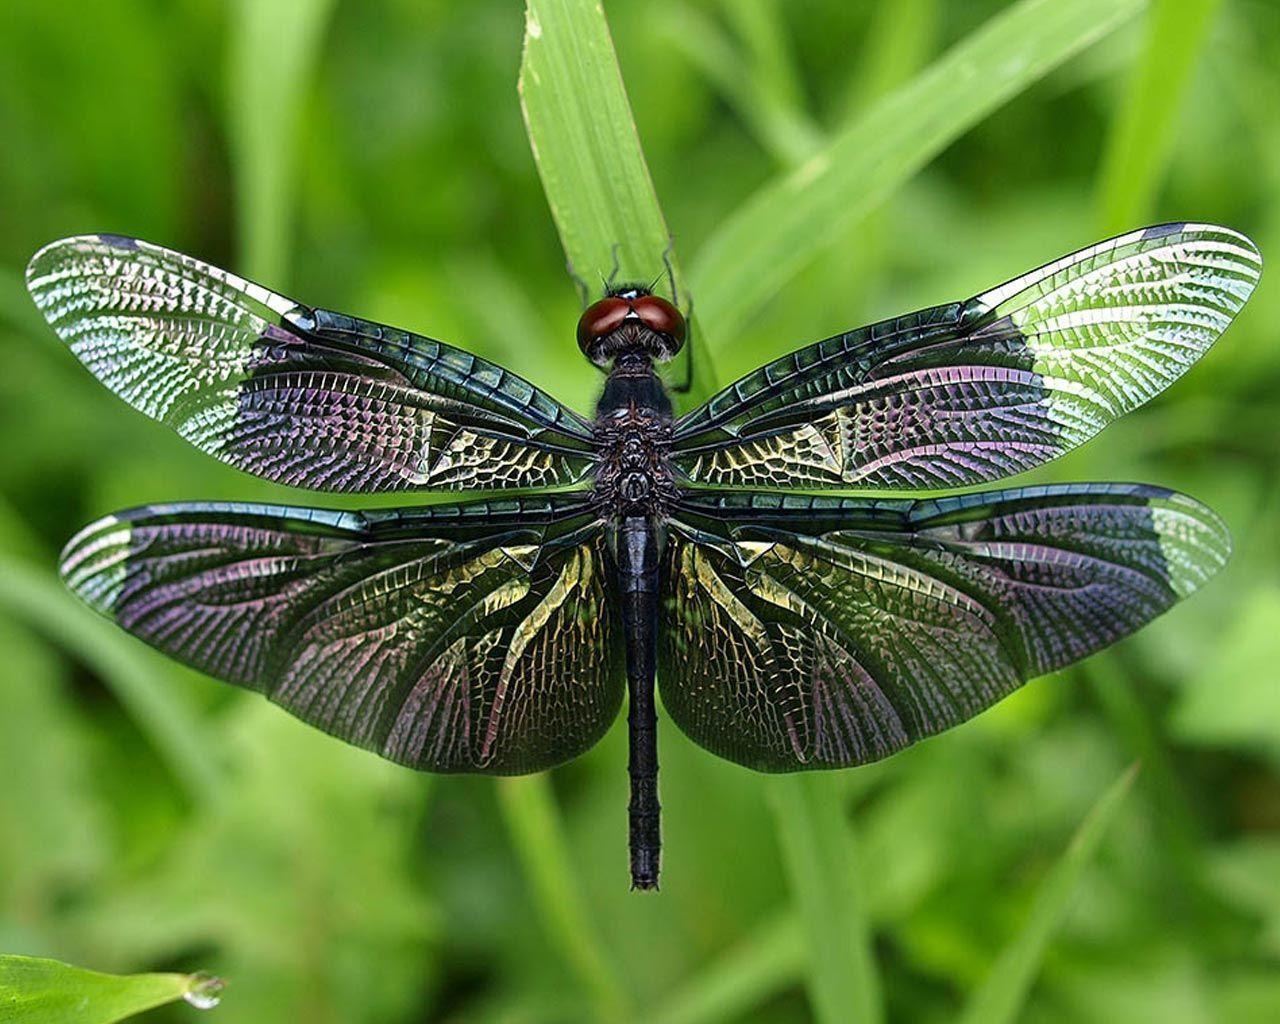 Desktop Wallpaper · Gallery · Nature · Dragonfly insect. Free